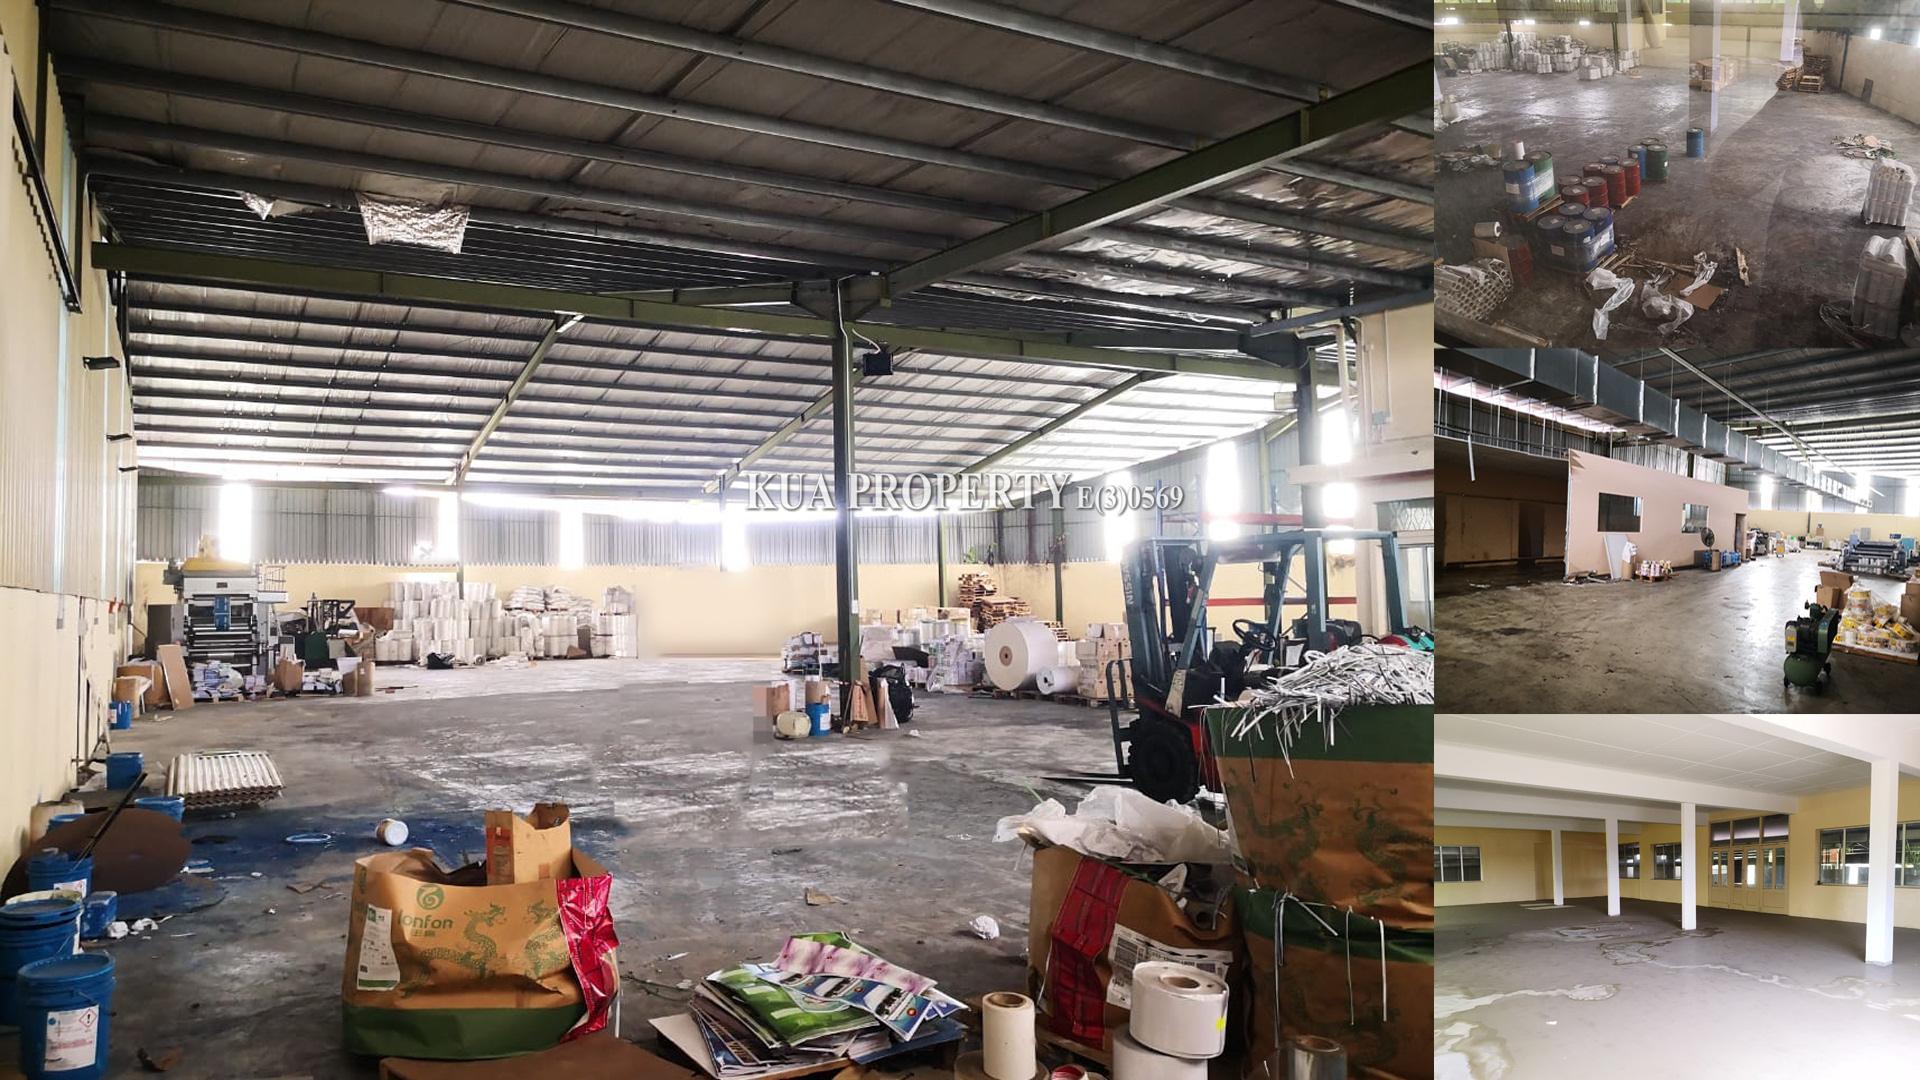 Detached Warehouse for Rent!! at Foochow Road, Kuching